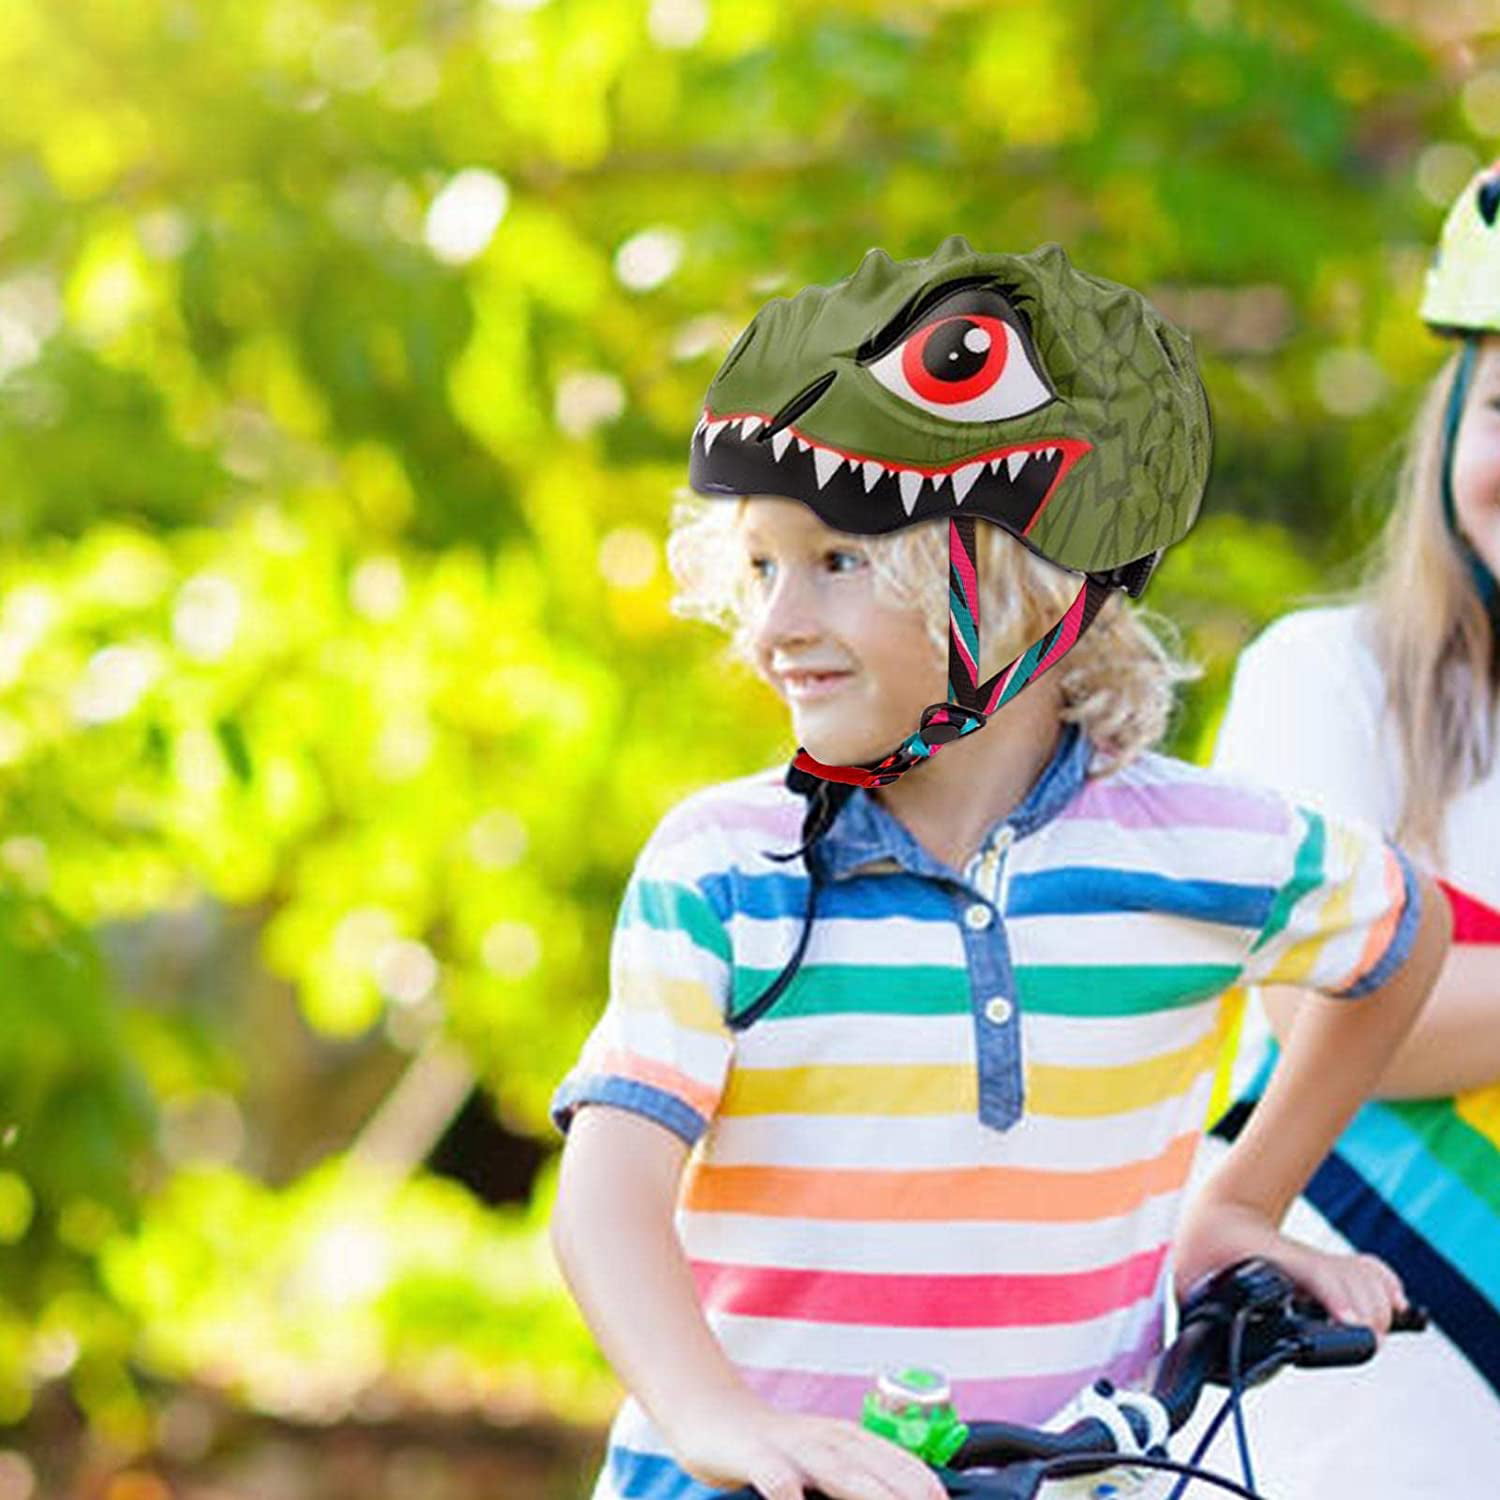 Details about   Kids Helmet Safety Cycling Scooter Bike Rabbit and Dinosaur Helmets 